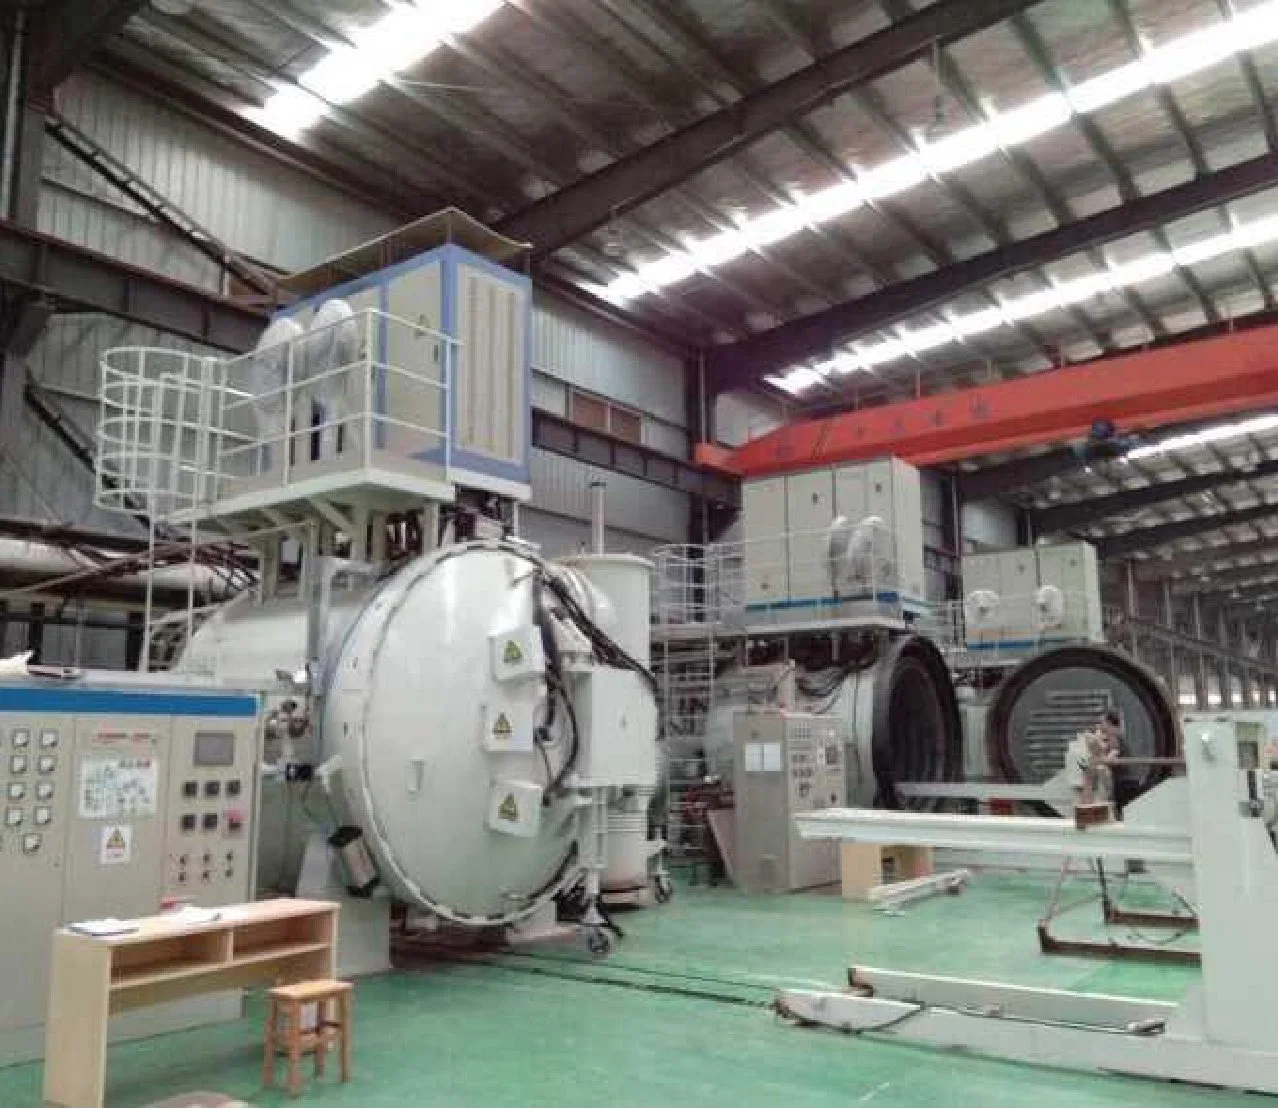 Integrated Vacuum Degreasing and Sintering Equipment for Debinding and Alloying of Metal Partsvacuum Sintering Equipment for MIM/Pm Parts